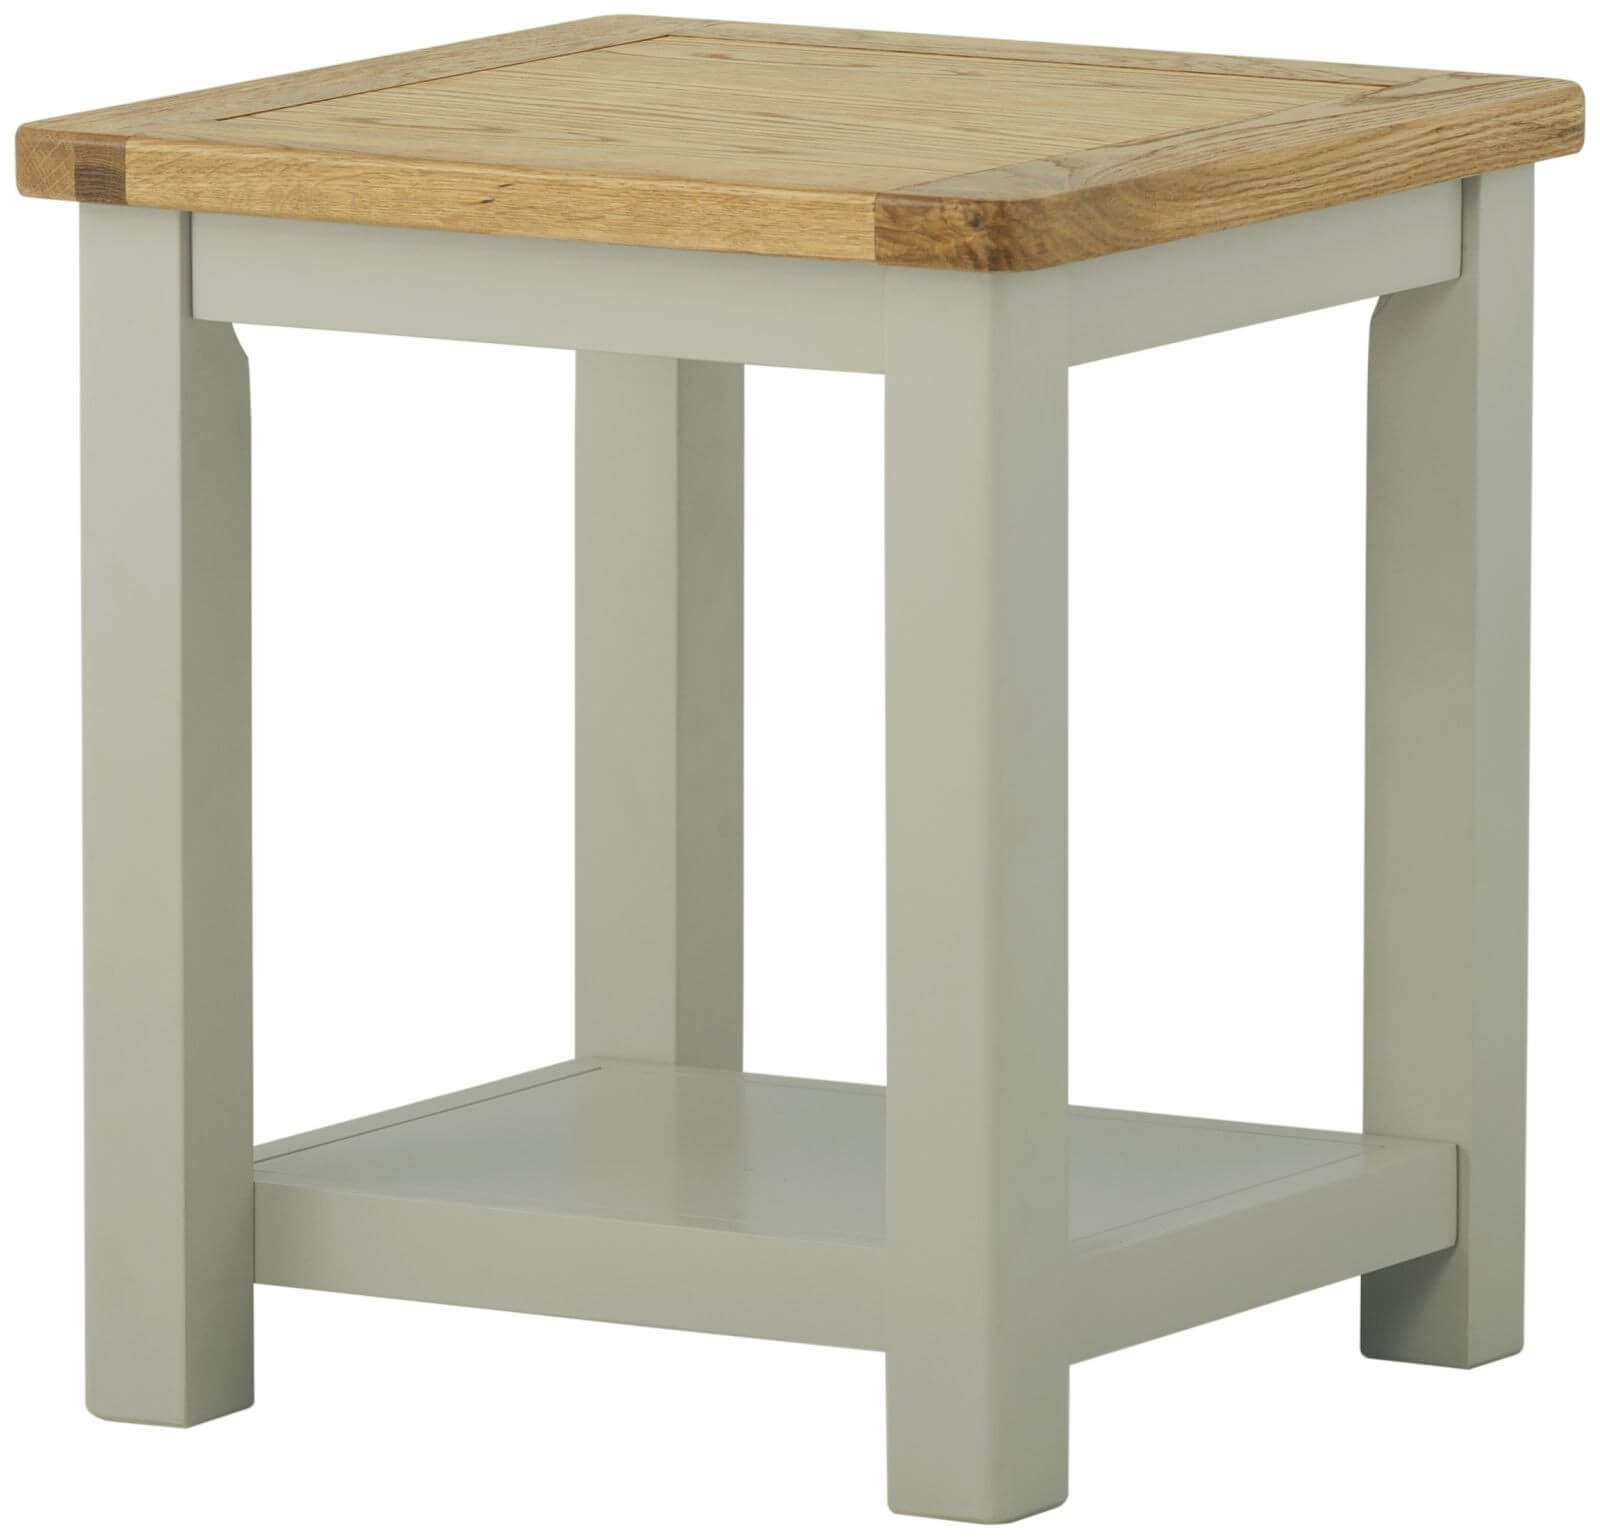 Showing image for Seattle lamp table - stone